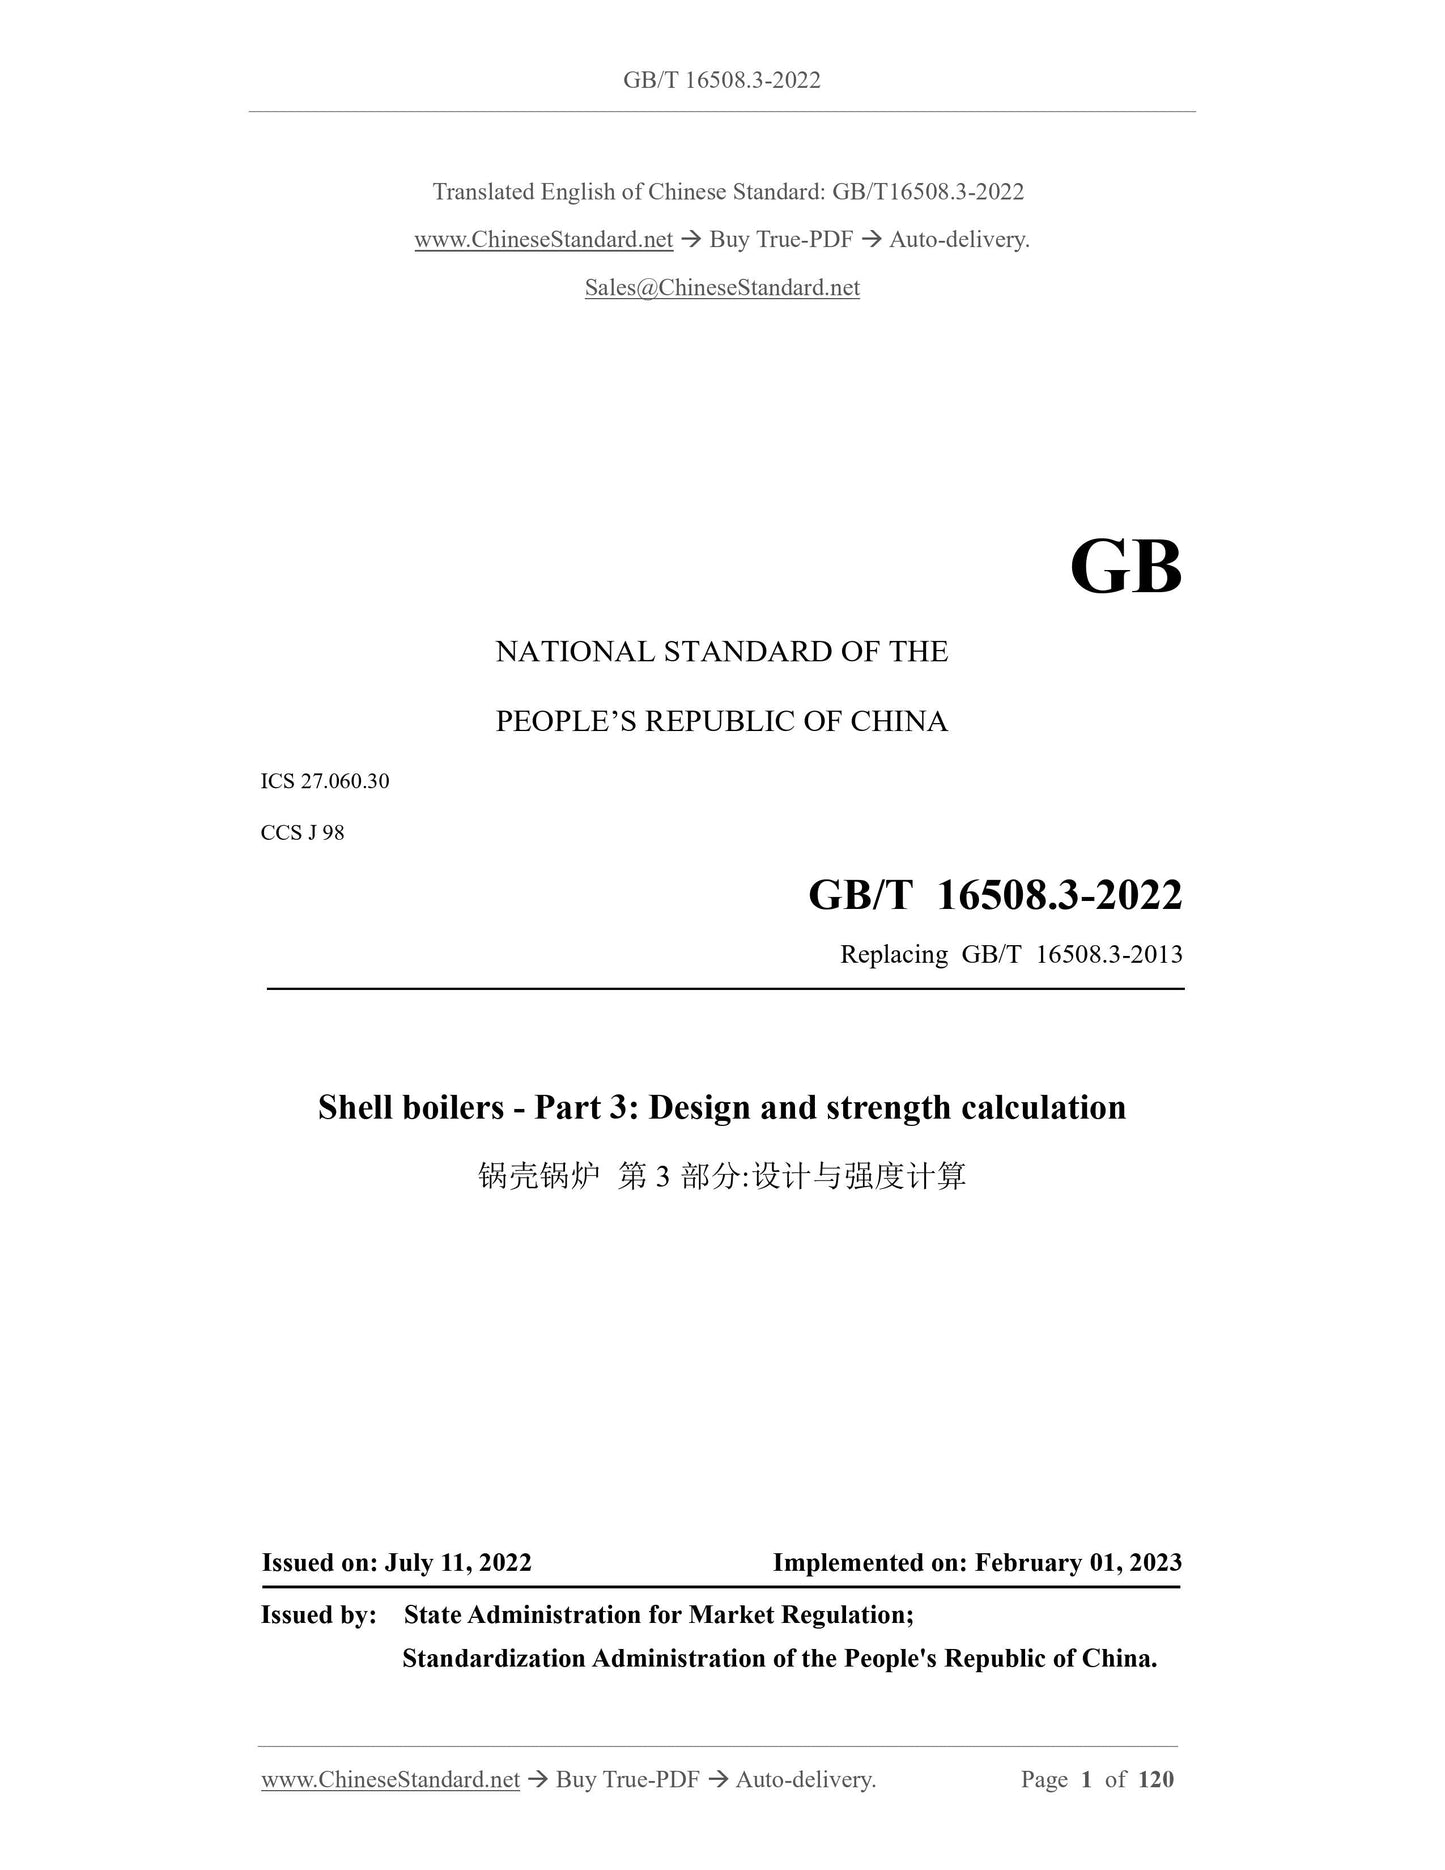 GB/T 16508.3-2022 Page 1